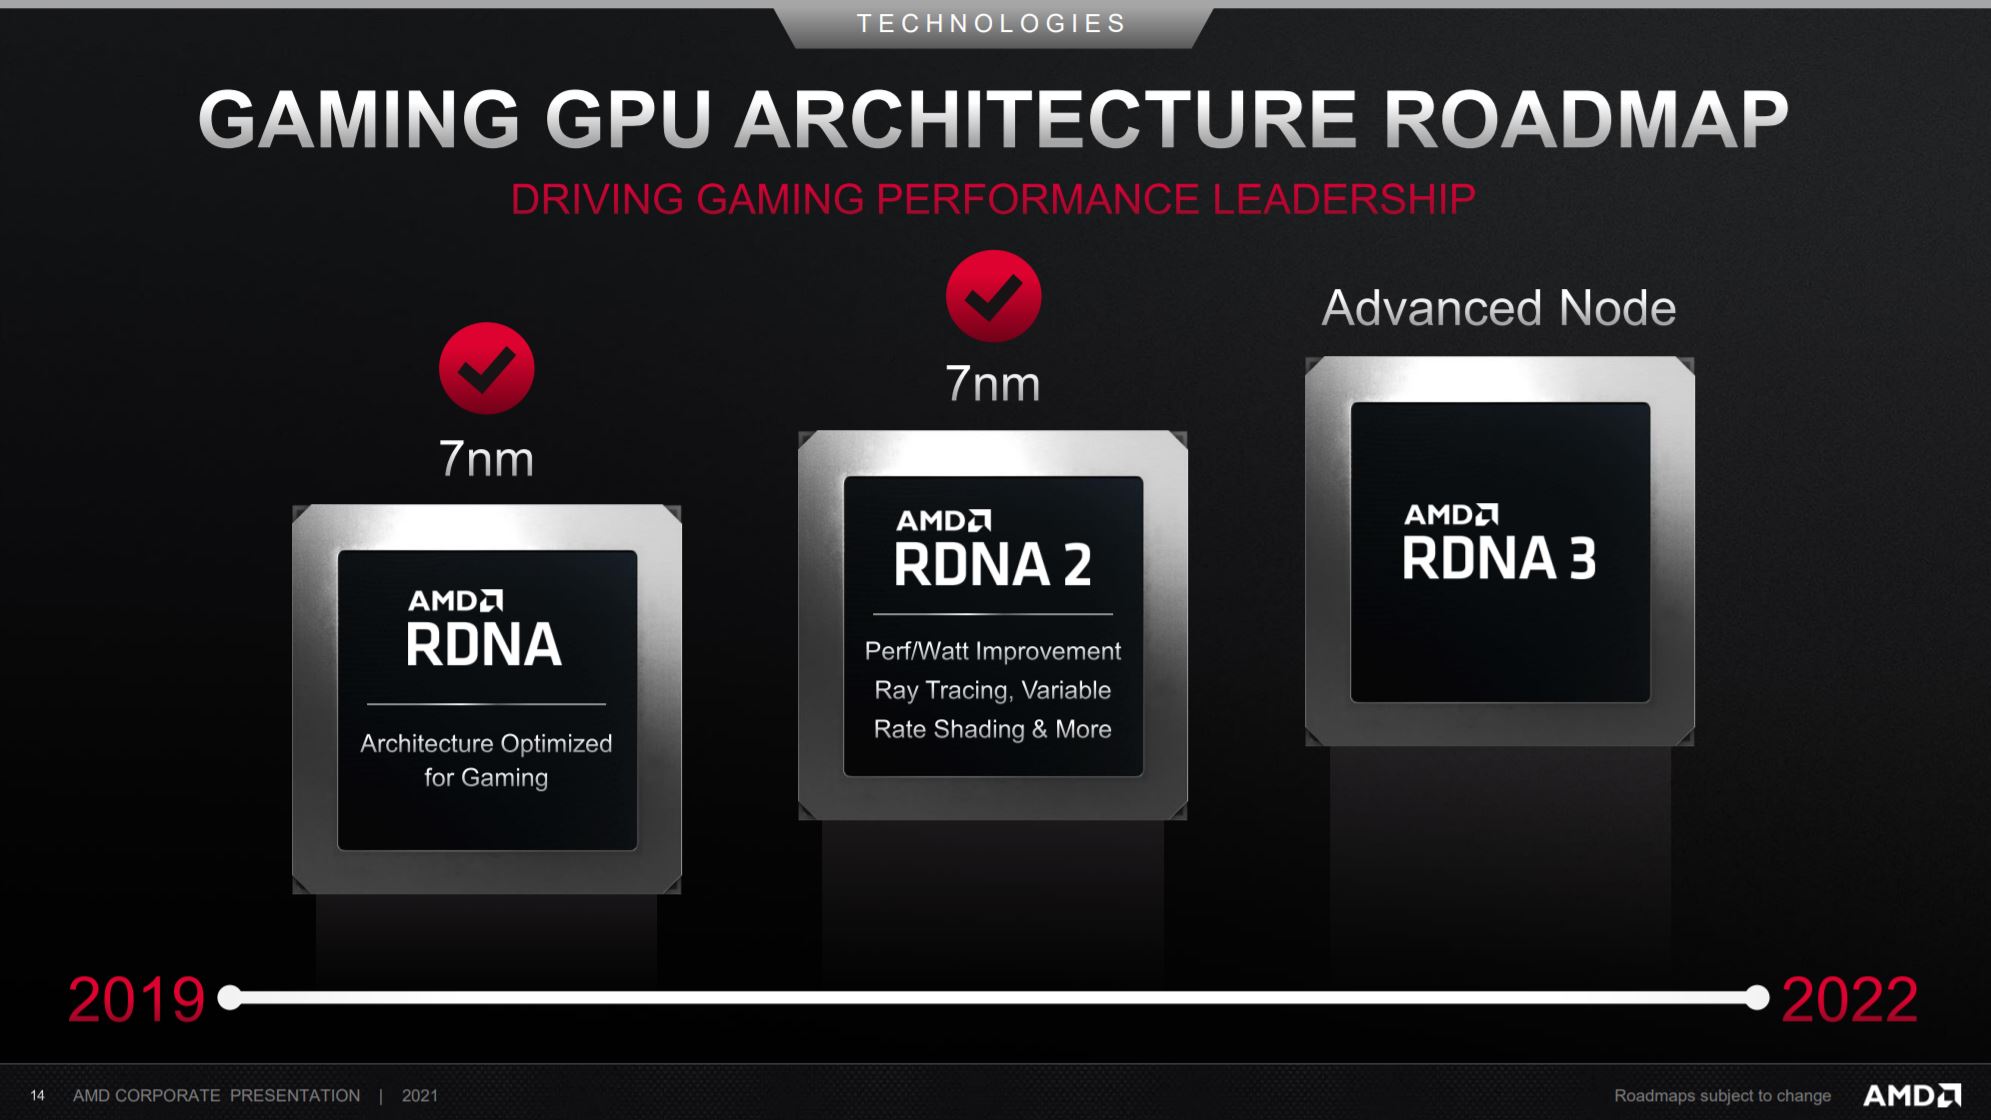 AMD confirms RDNA3 GPUs are indeed coming in VideoCardz.com